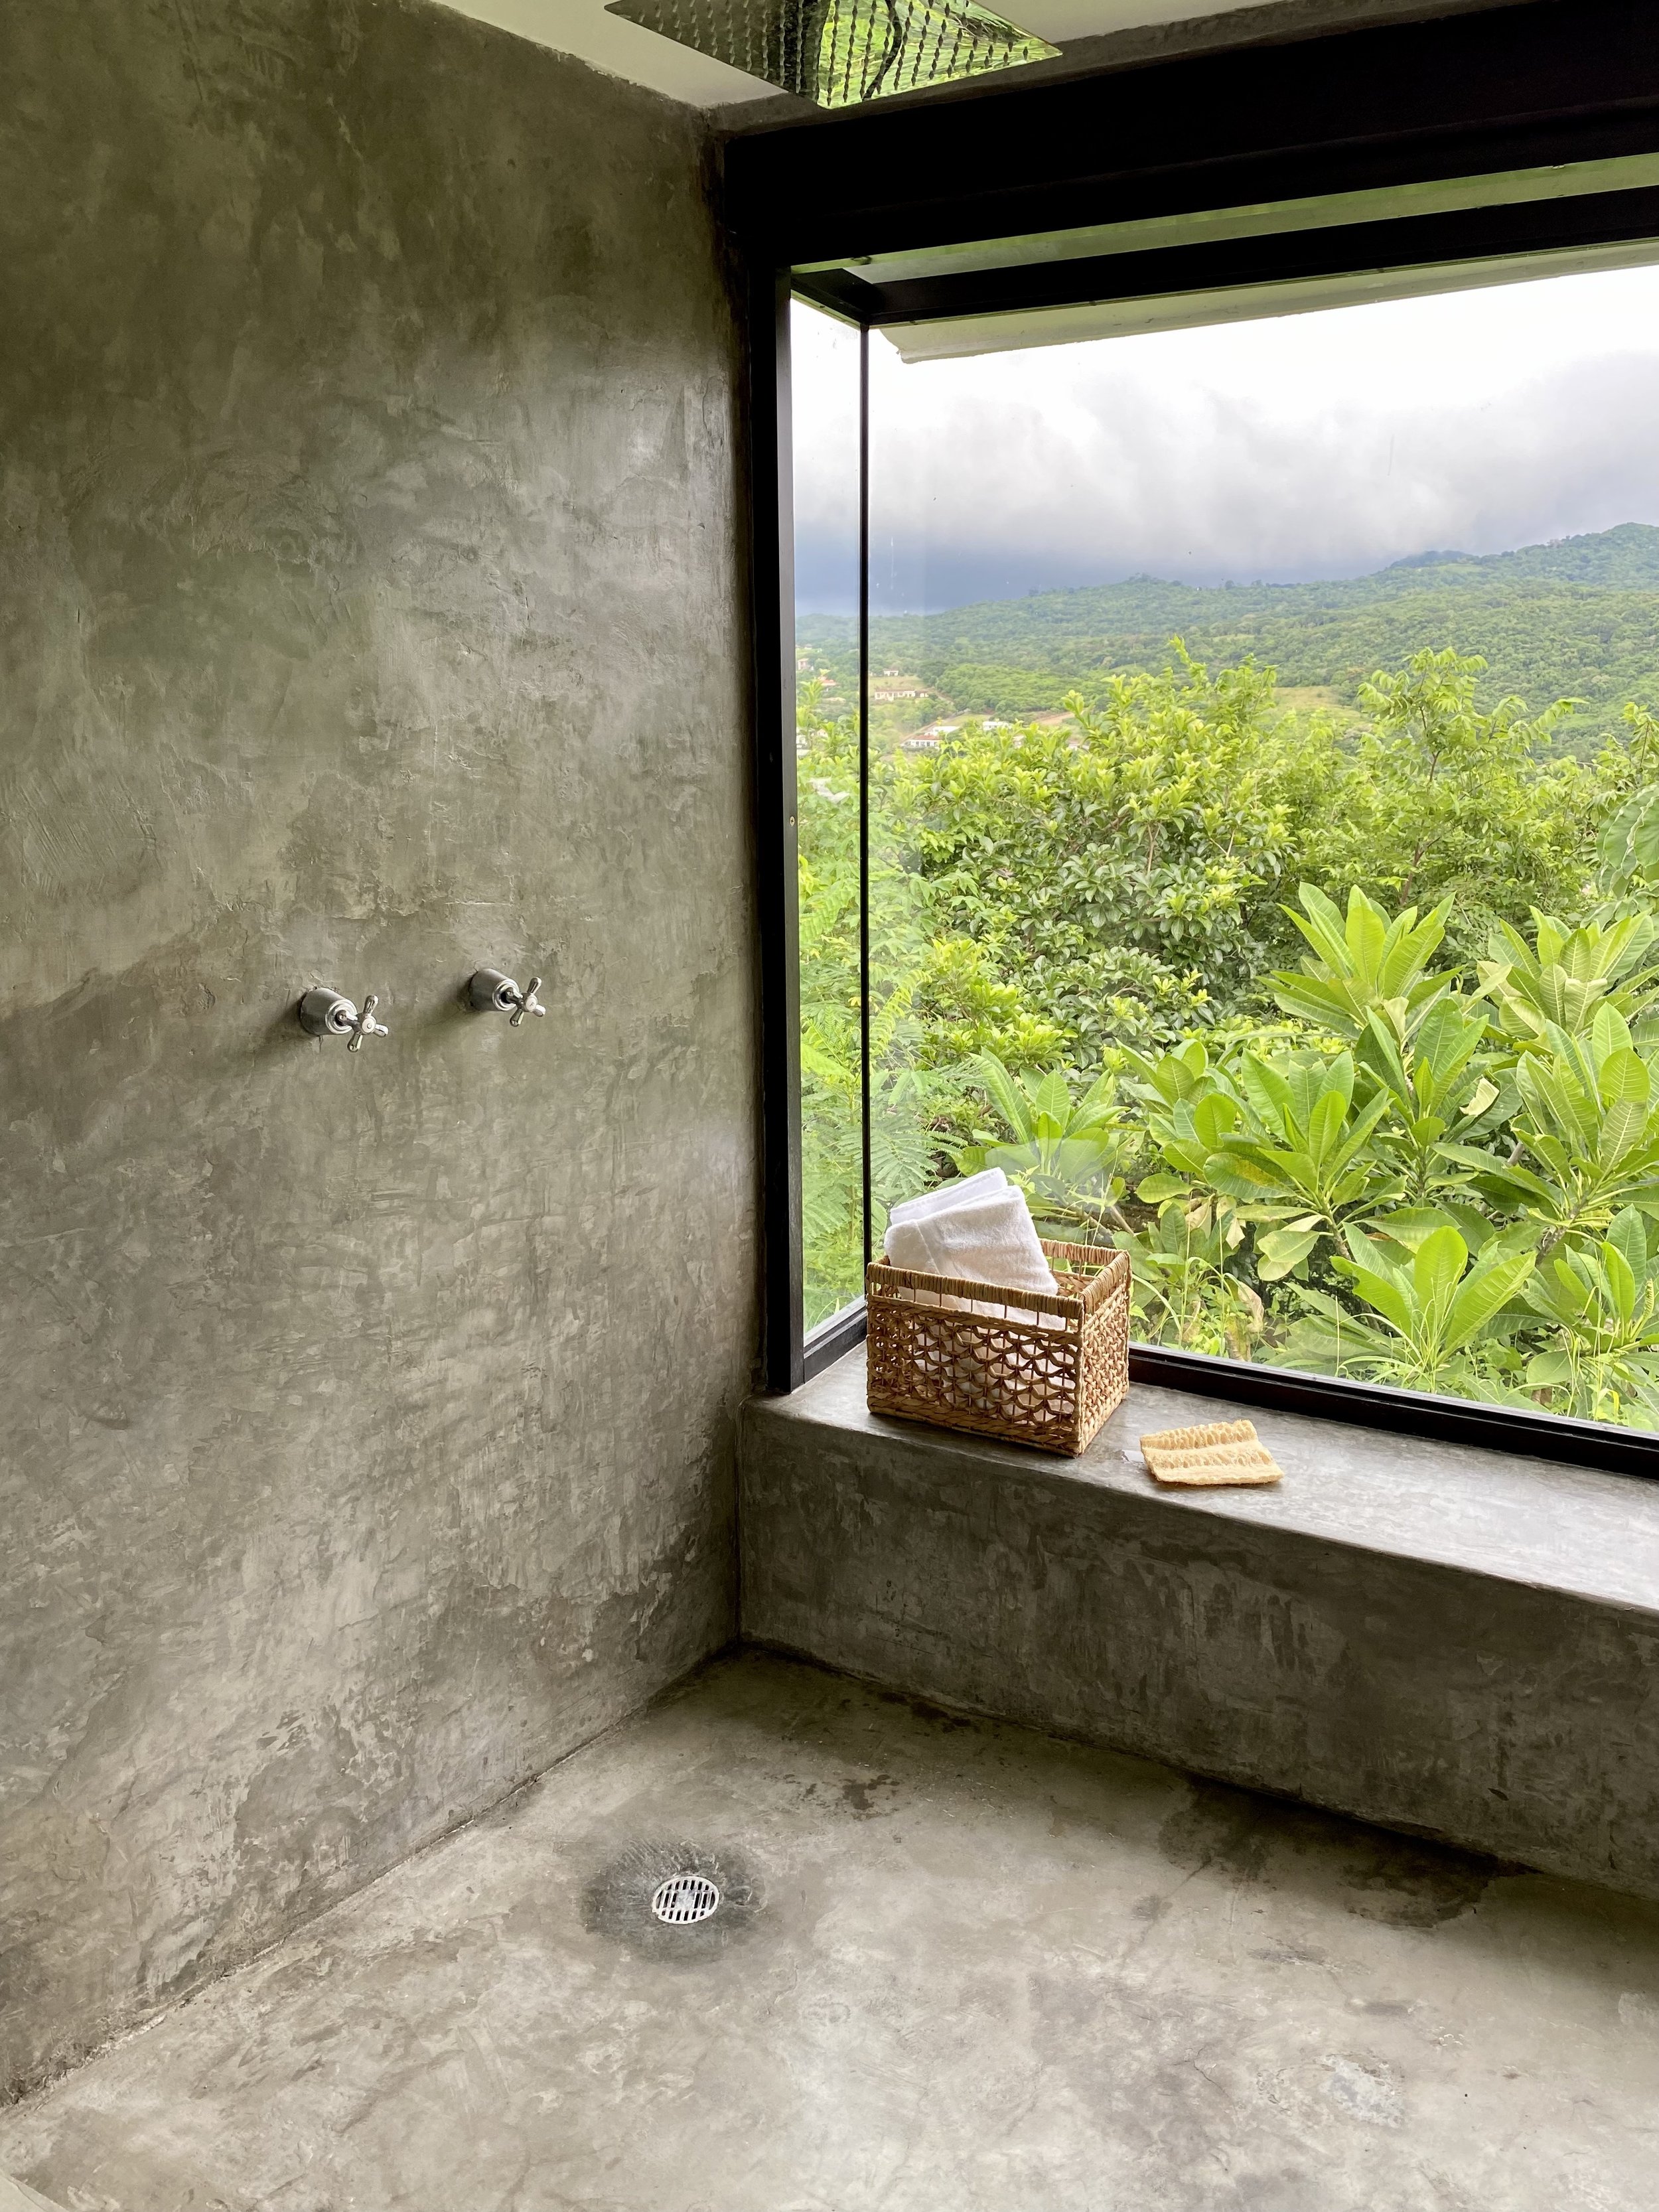 The Queen Suite rainforest shower overlooking the mountains